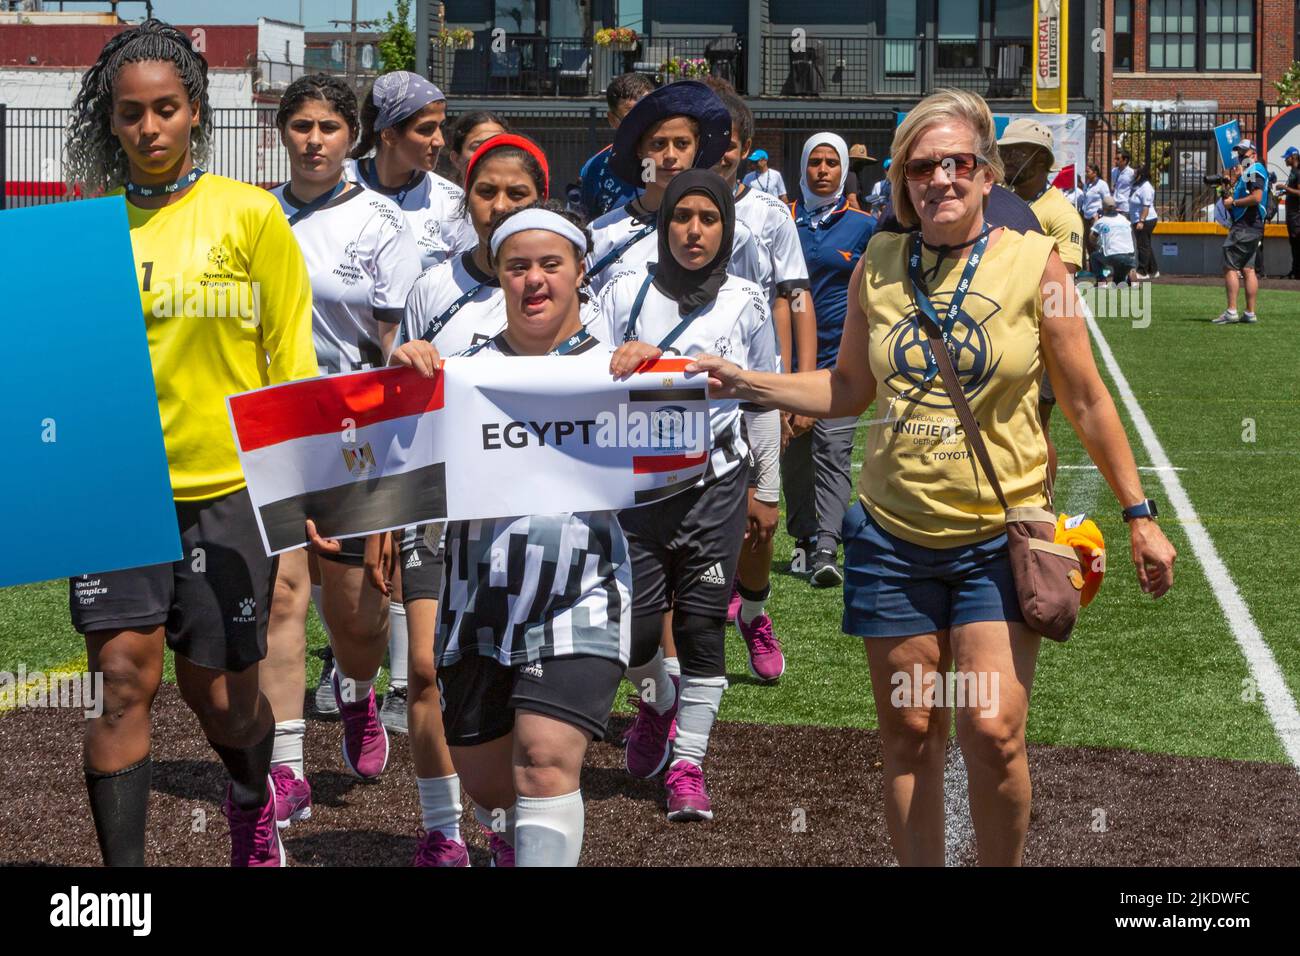 Detroit, Michigan, USA. 31st July, 2022. The Egyptian women's team marches onto the field during the opening ceremonies of the Special Olympics Unified Cup football (soccer) tournament. The Unified Cup pairs athletes with and without intellectual disabilities as teammates. Credit: Jim West/Alamy Live News Stock Photo